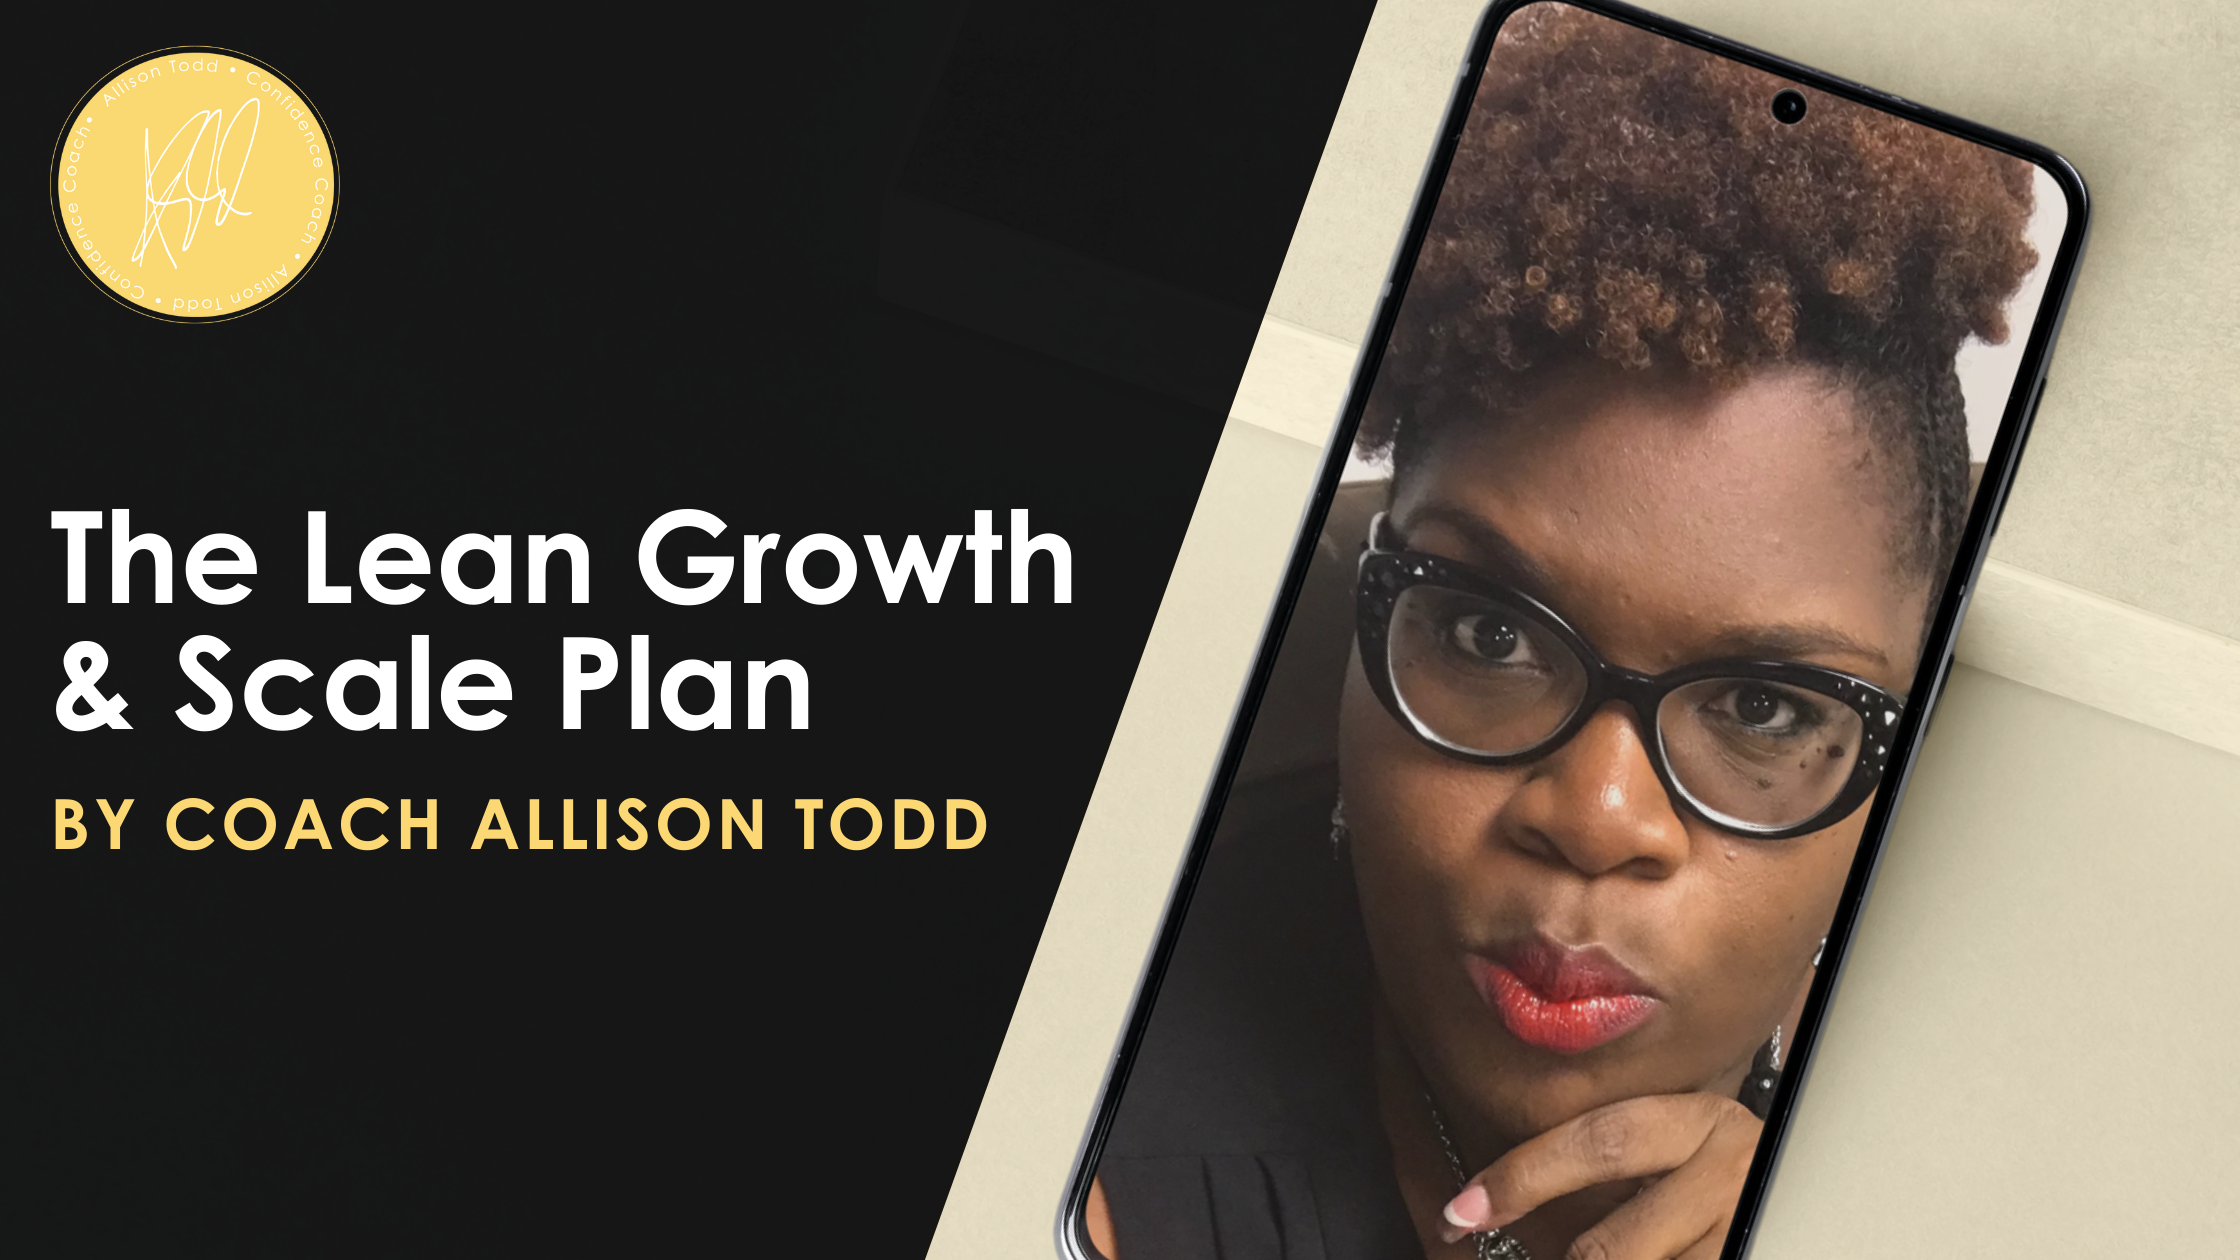 The Lean Growth & Scale Plan by Coach Allison Todd